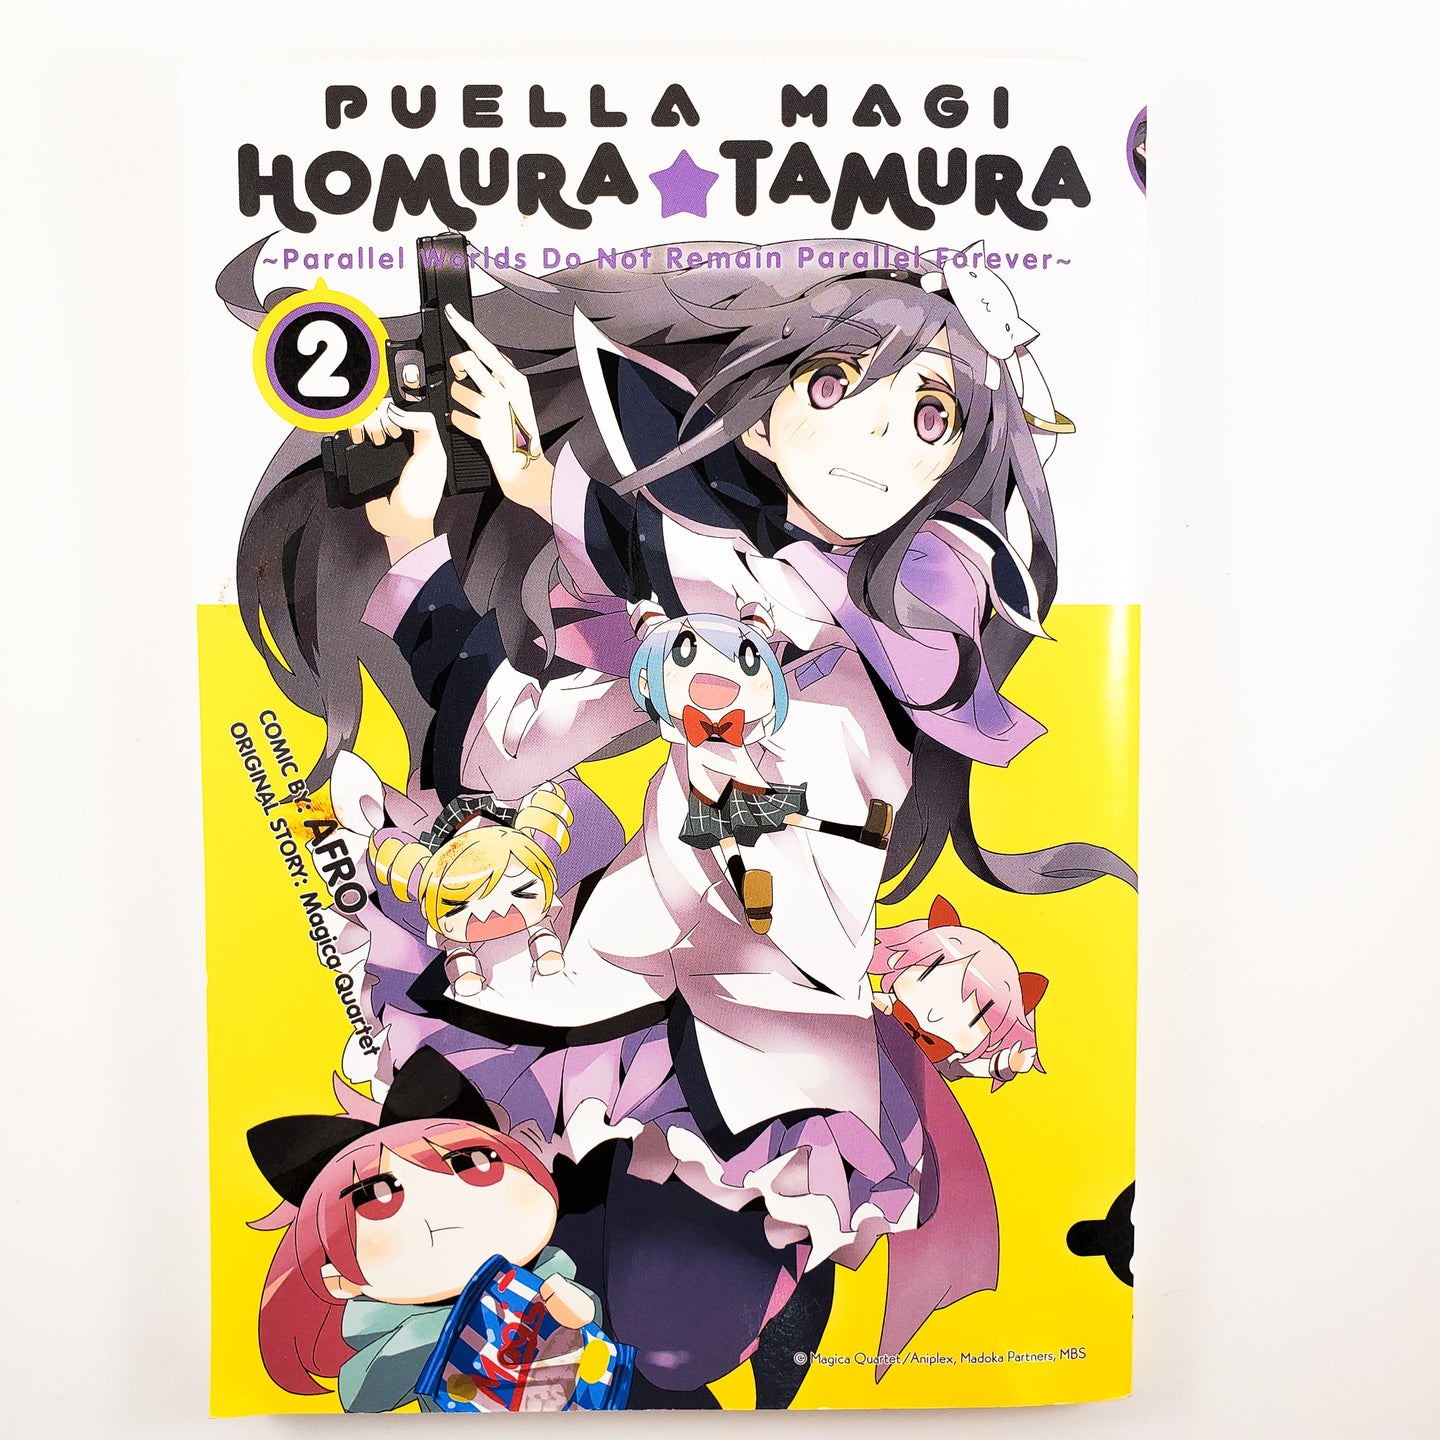 Puella Magi Homura Tamura: Parallel Worlds Do Not Remain Parallel Forever Volume 2. Manga by AFRO and Magica Quartet.